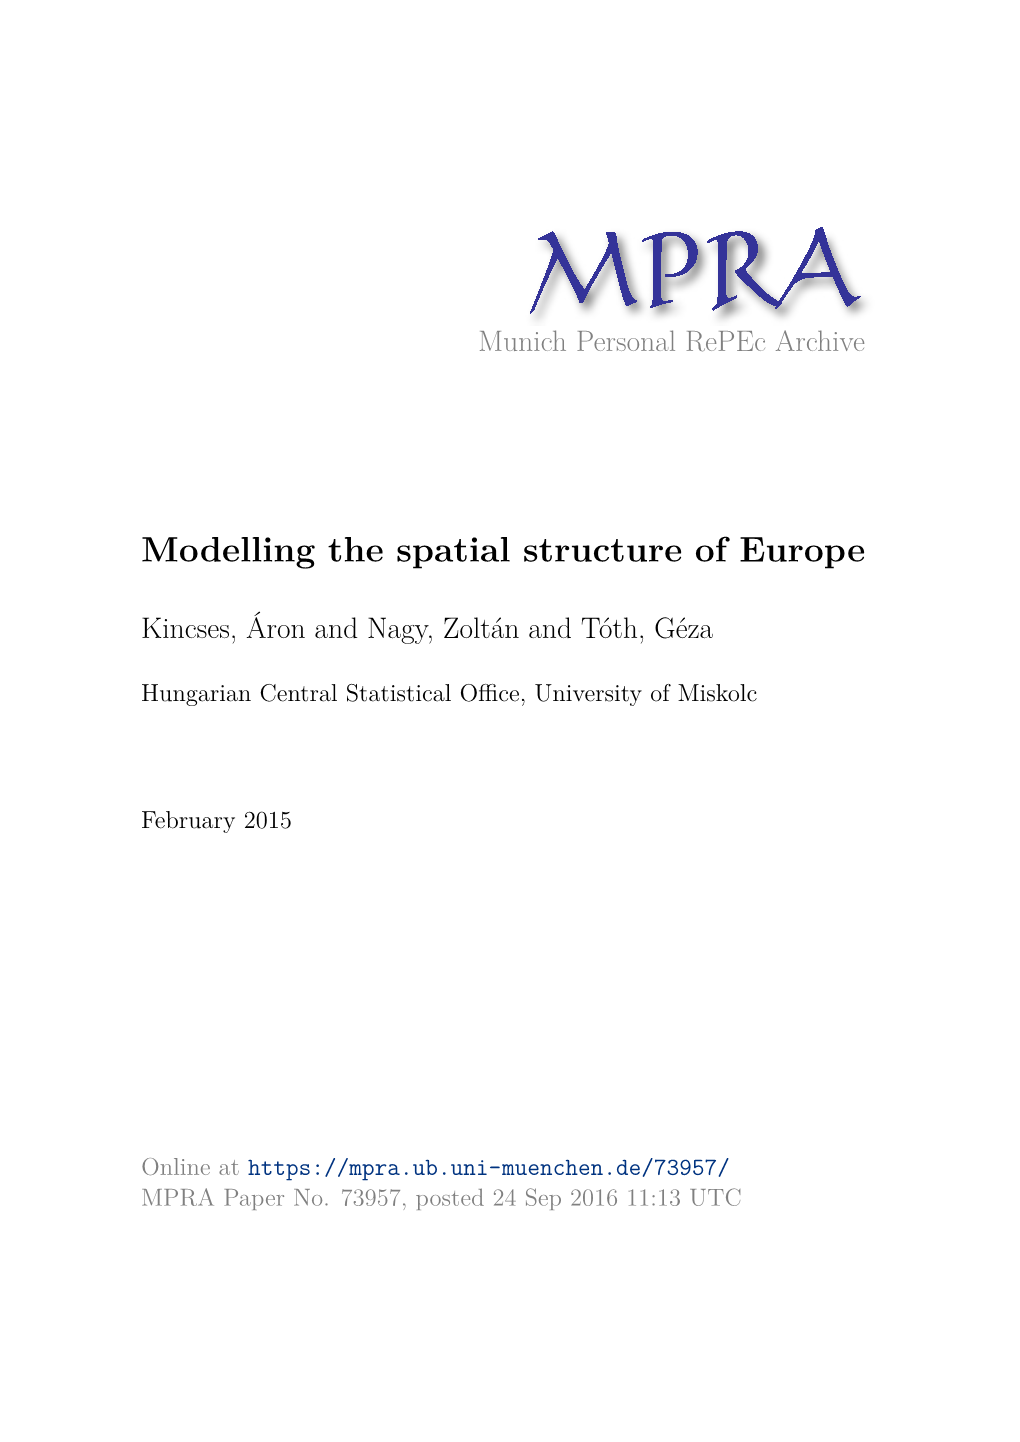 Modelling the Spatial Structure of Europe